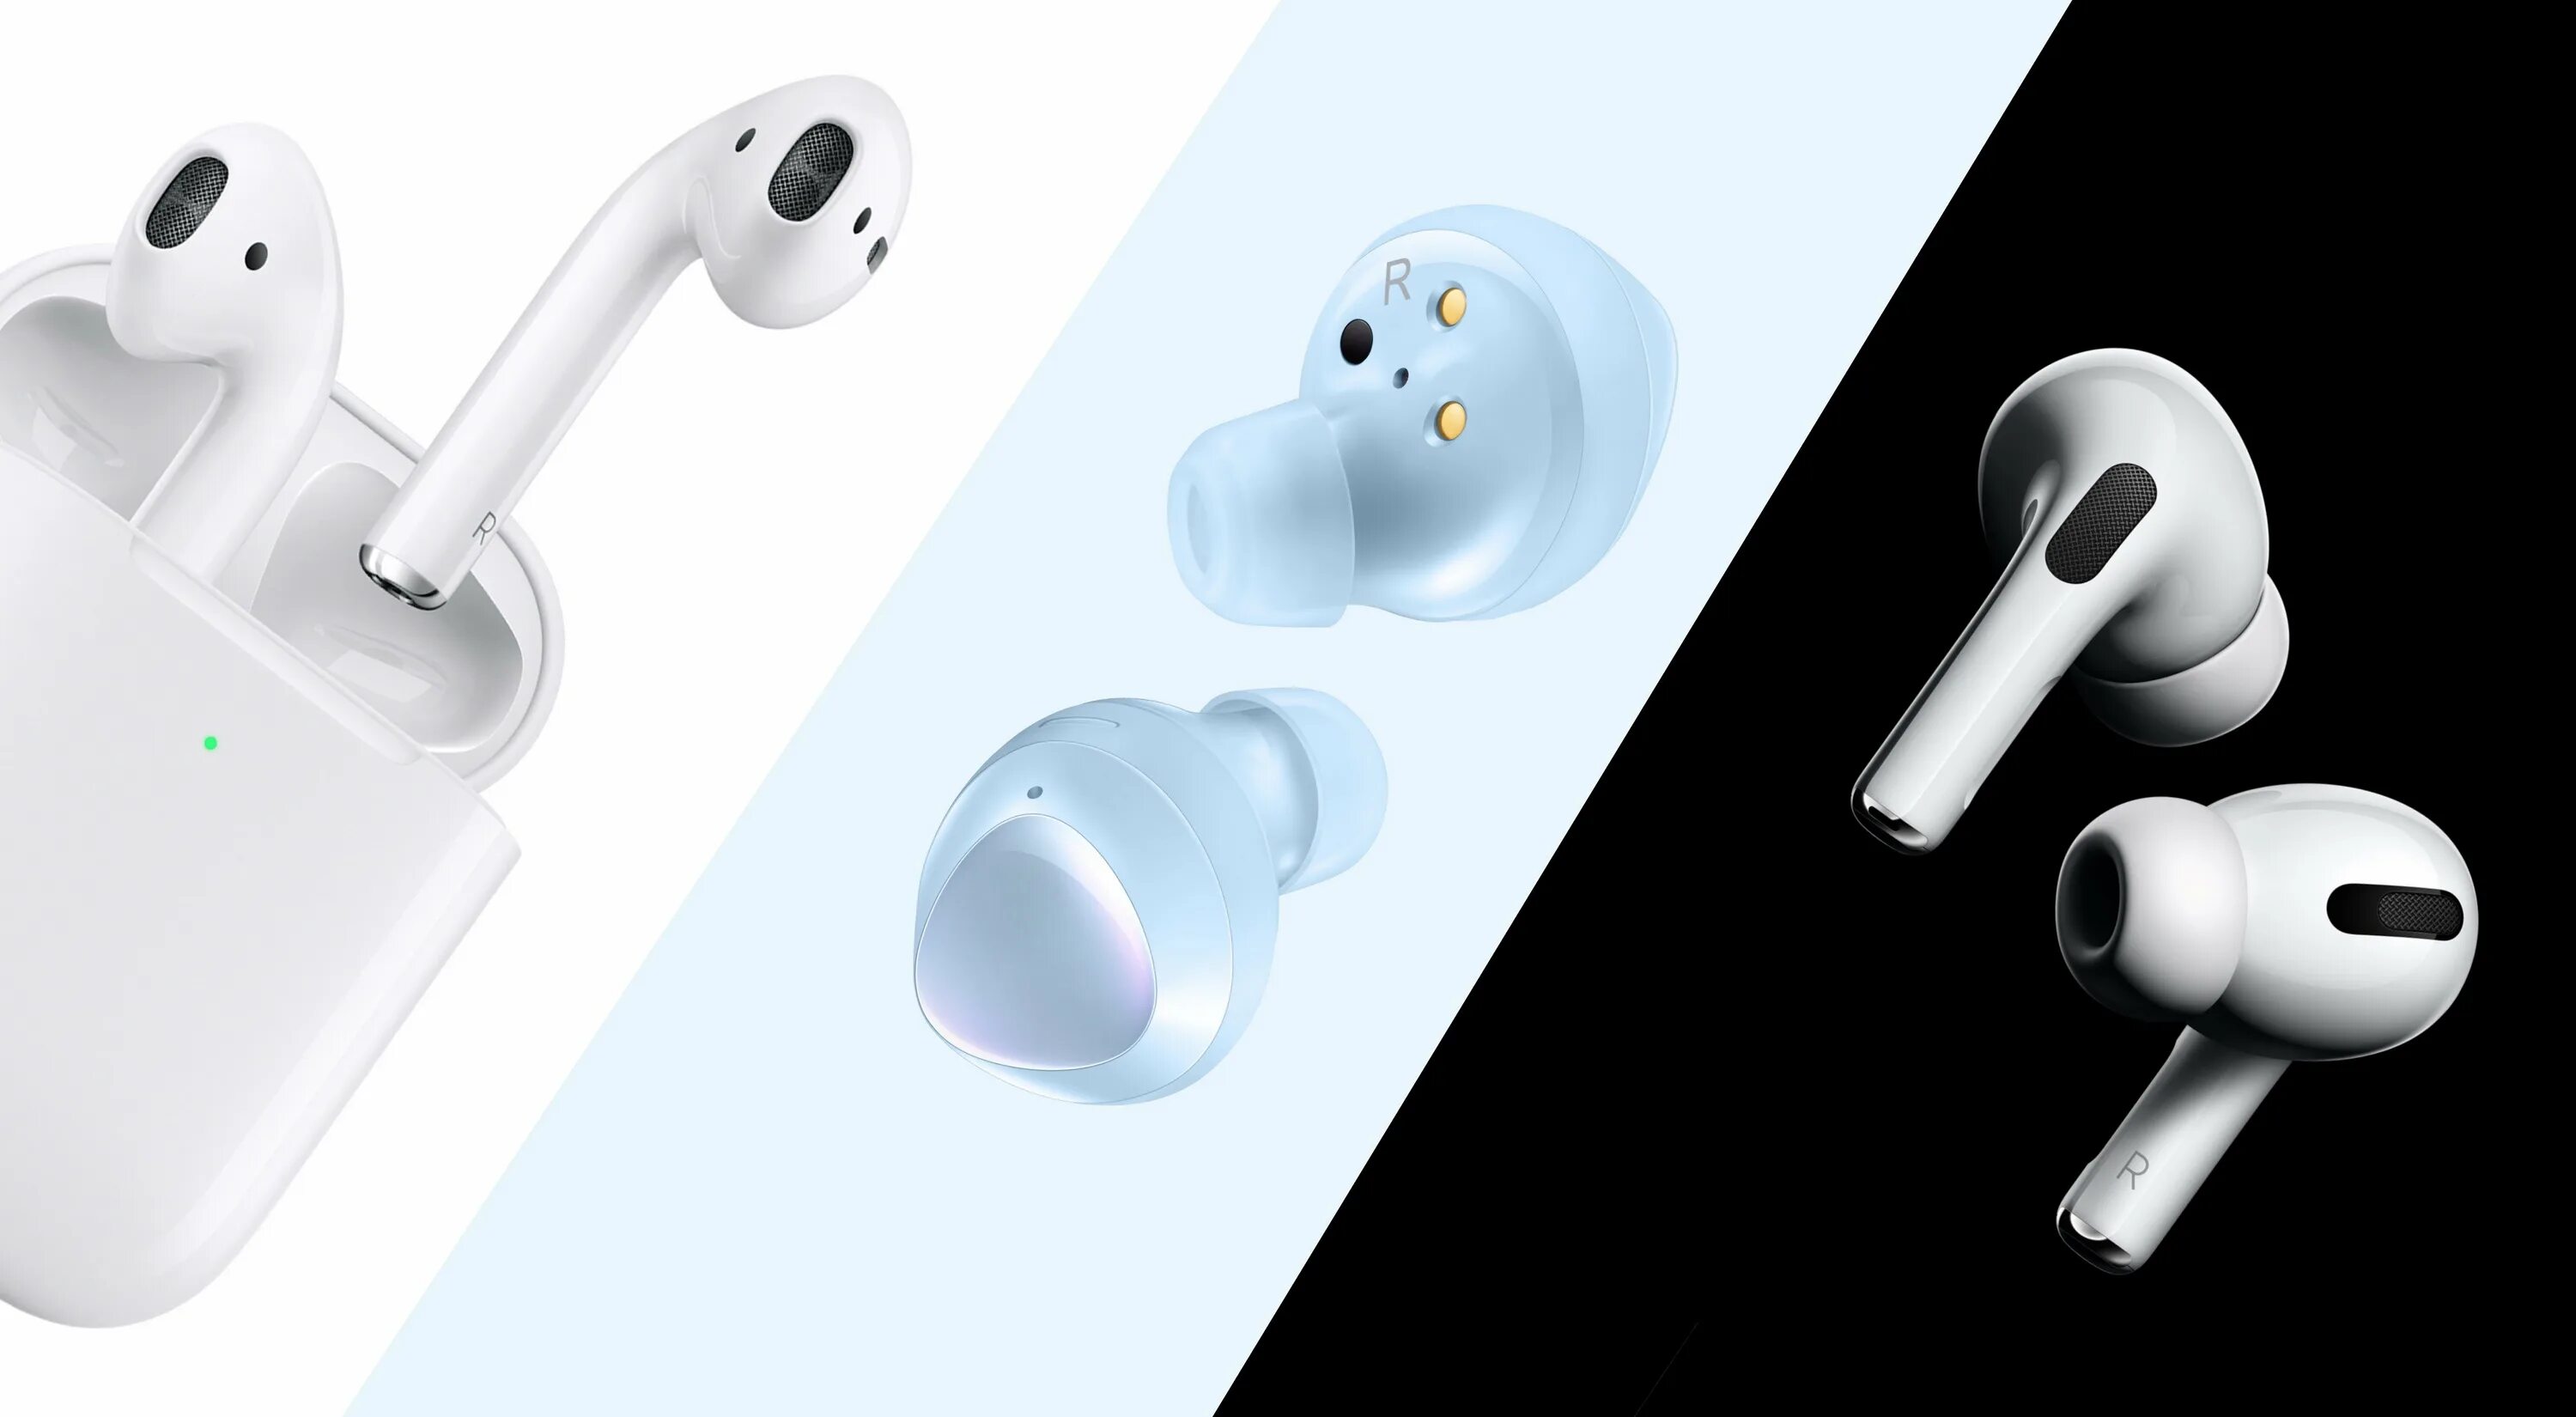 Airpods pro samsung. Samsung Galaxy Buds 2 Pro. AIRPODS Samsung Galaxy. Samsung AIRPODS 2. Samsung Buds 2 vs AIRPODS Pro.